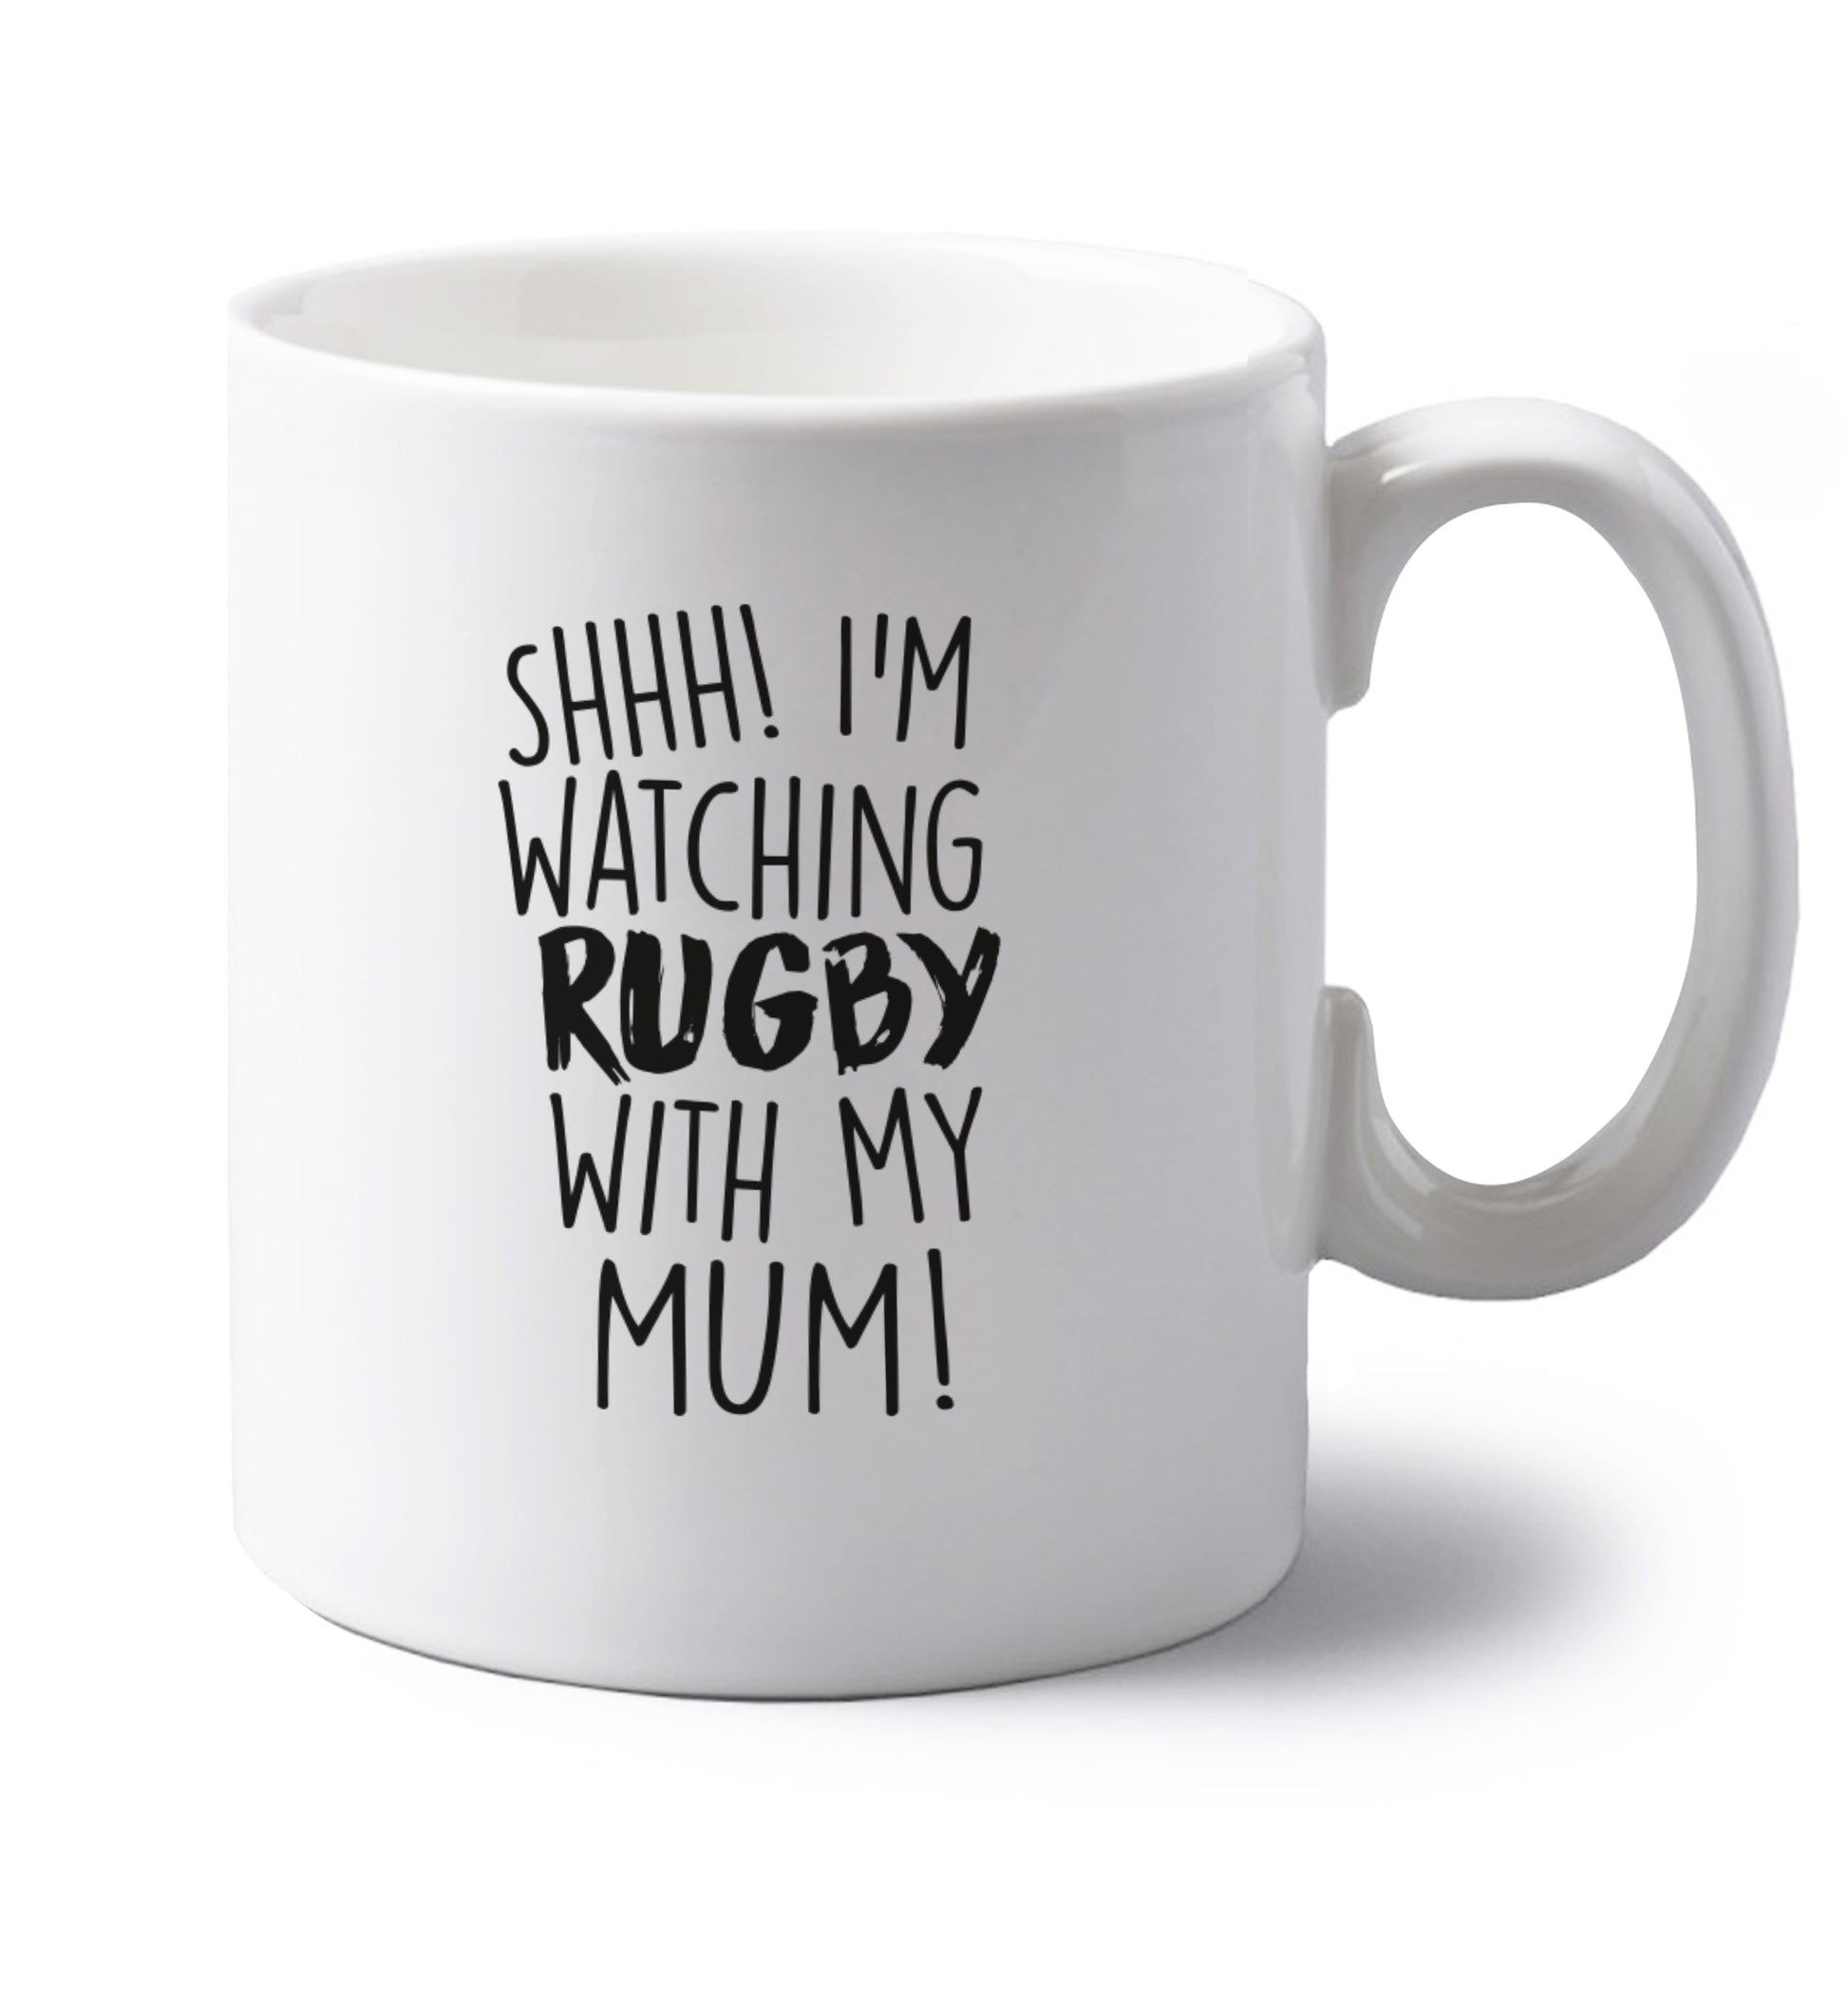 Shh... I'm watching rugby with my mum left handed white ceramic mug 